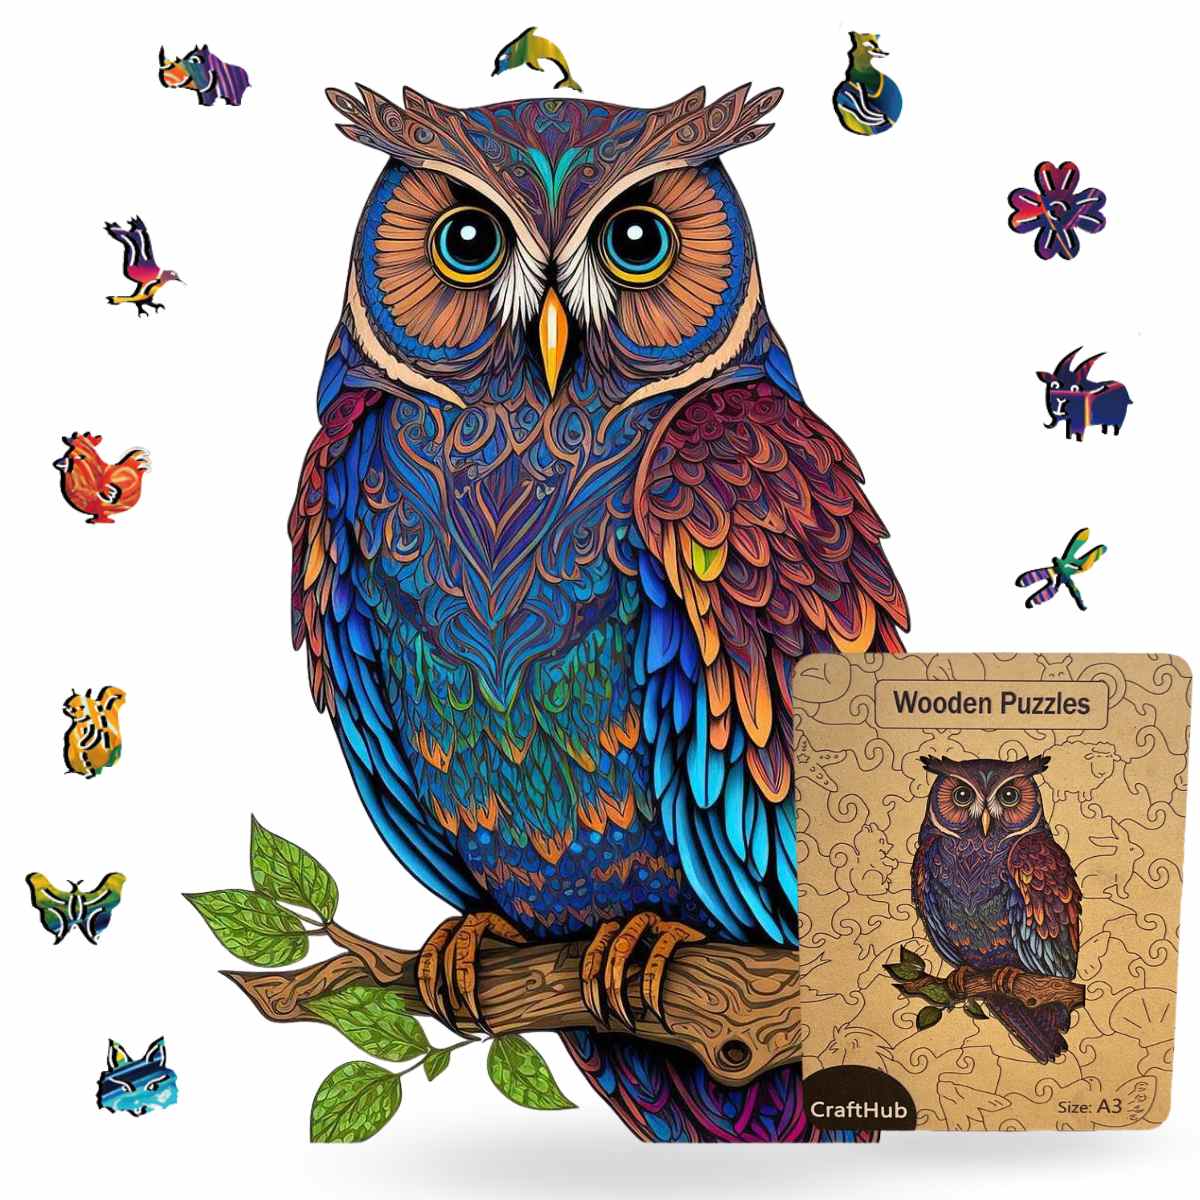 Animal Jigsaw Puzzle > Wooden Jigsaw Puzzle > Jigsaw Puzzle A3+Wooden Box Wisdom Owl - Jigsaw Puzzle